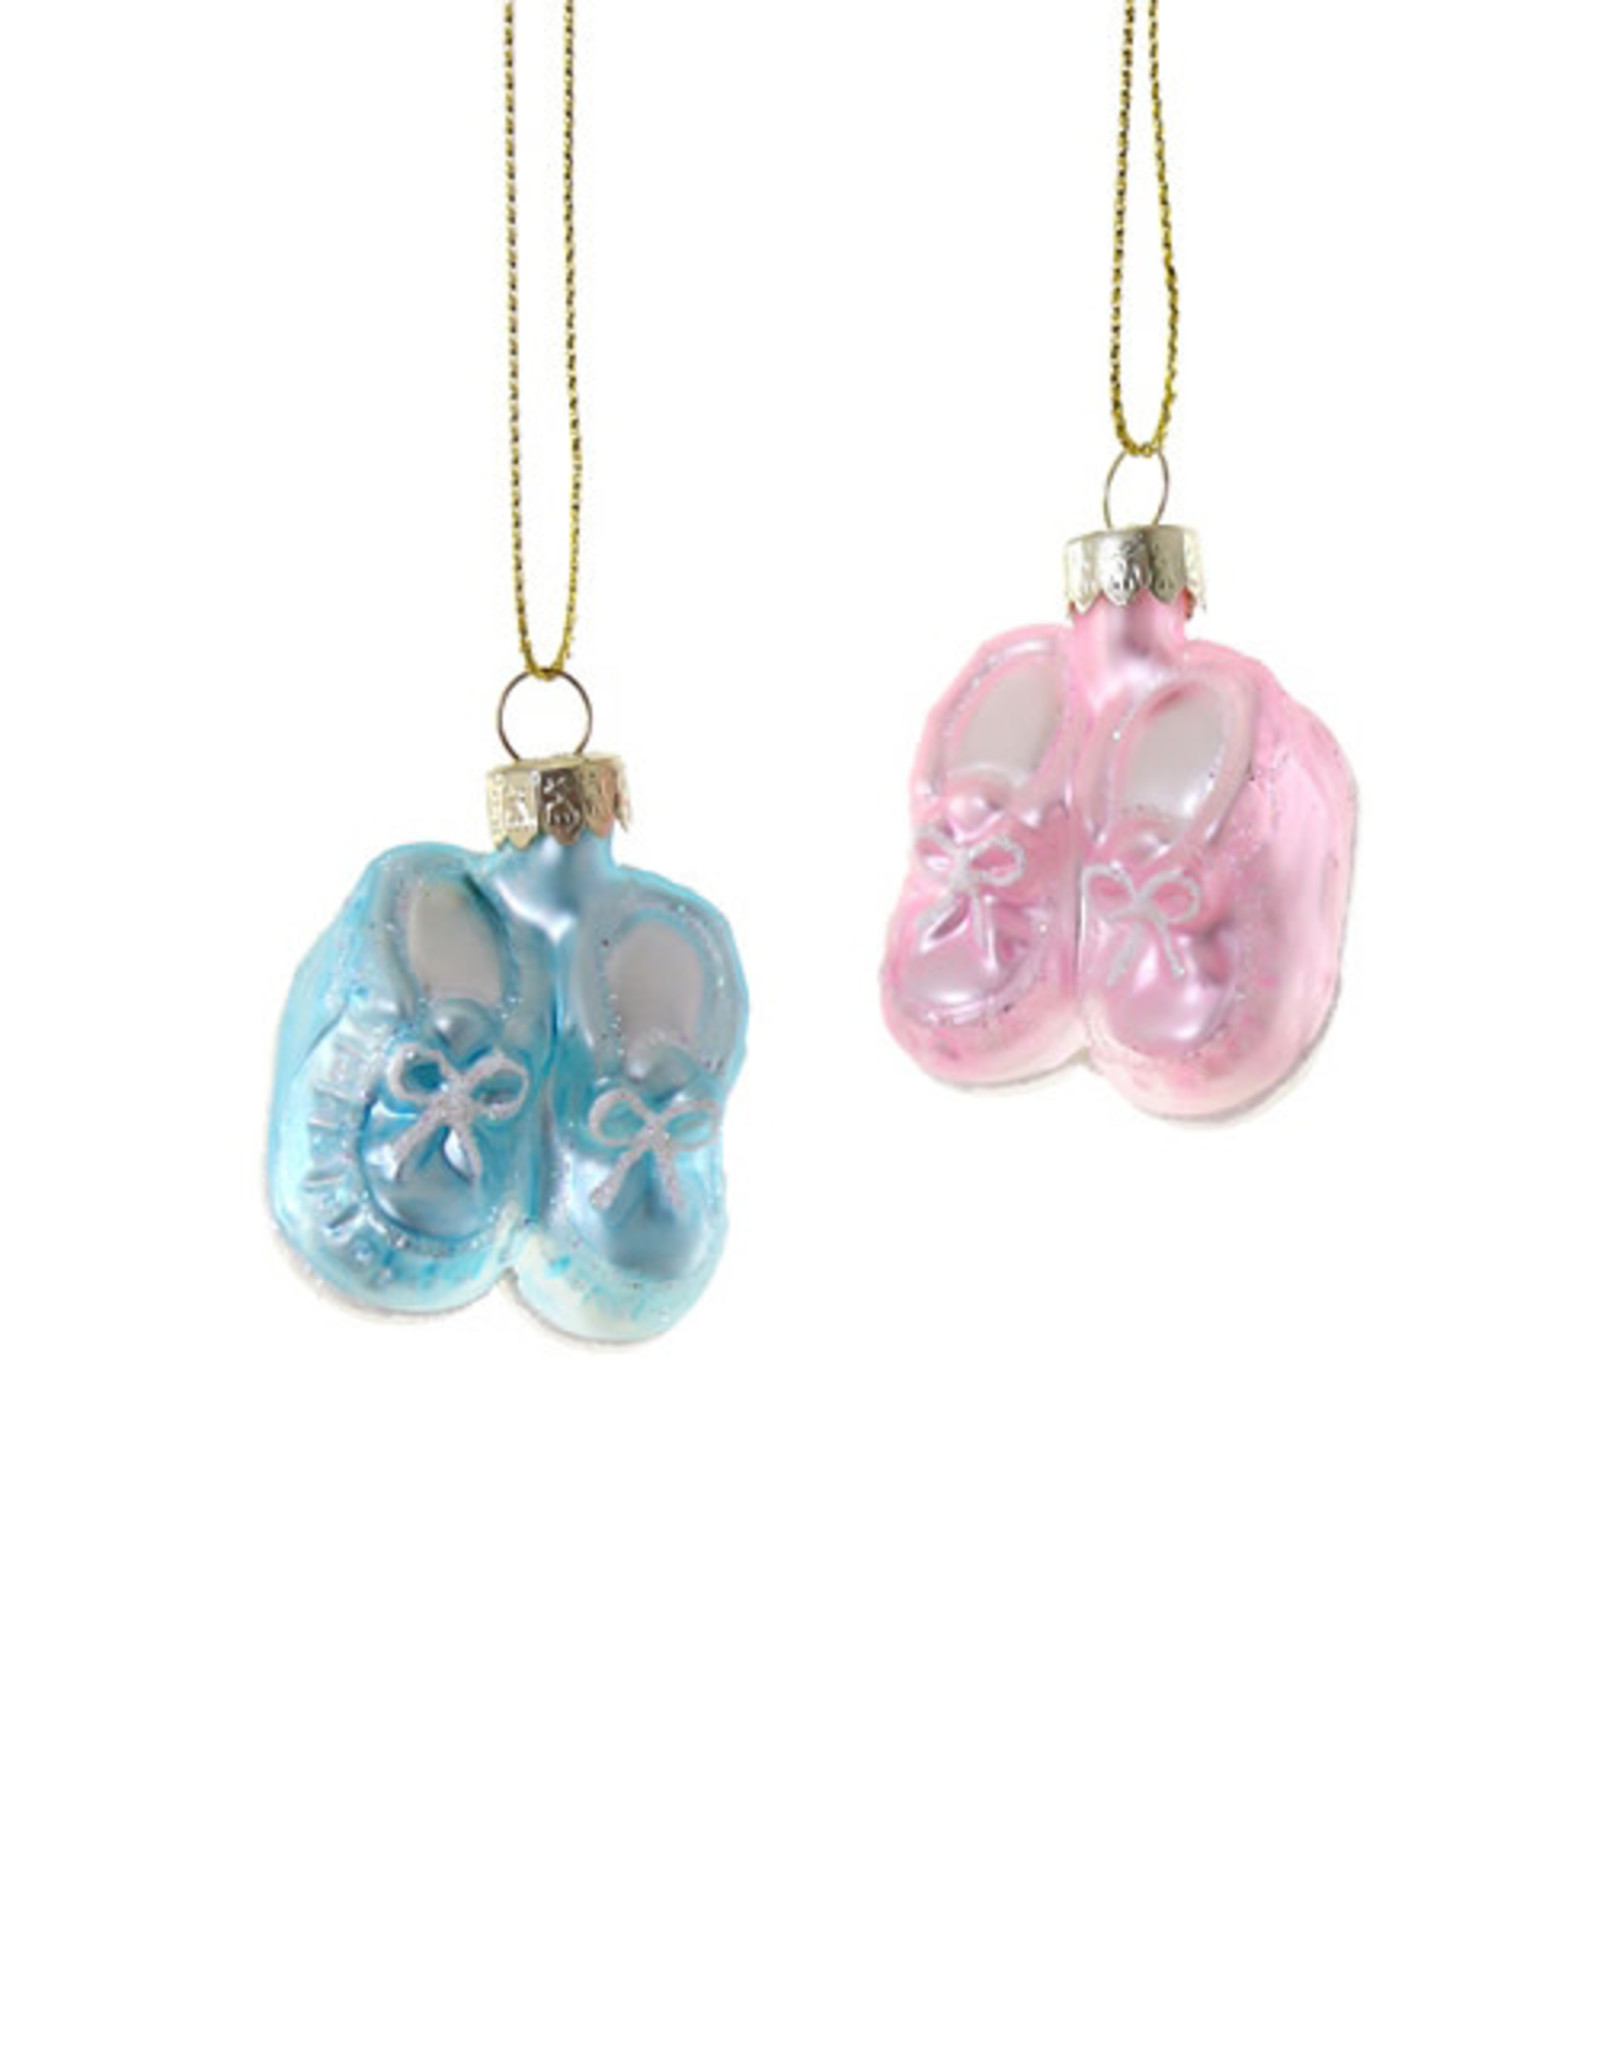 Cody Foster & Co. BABY BOOTIES ORNAMENT - 2 STYLES